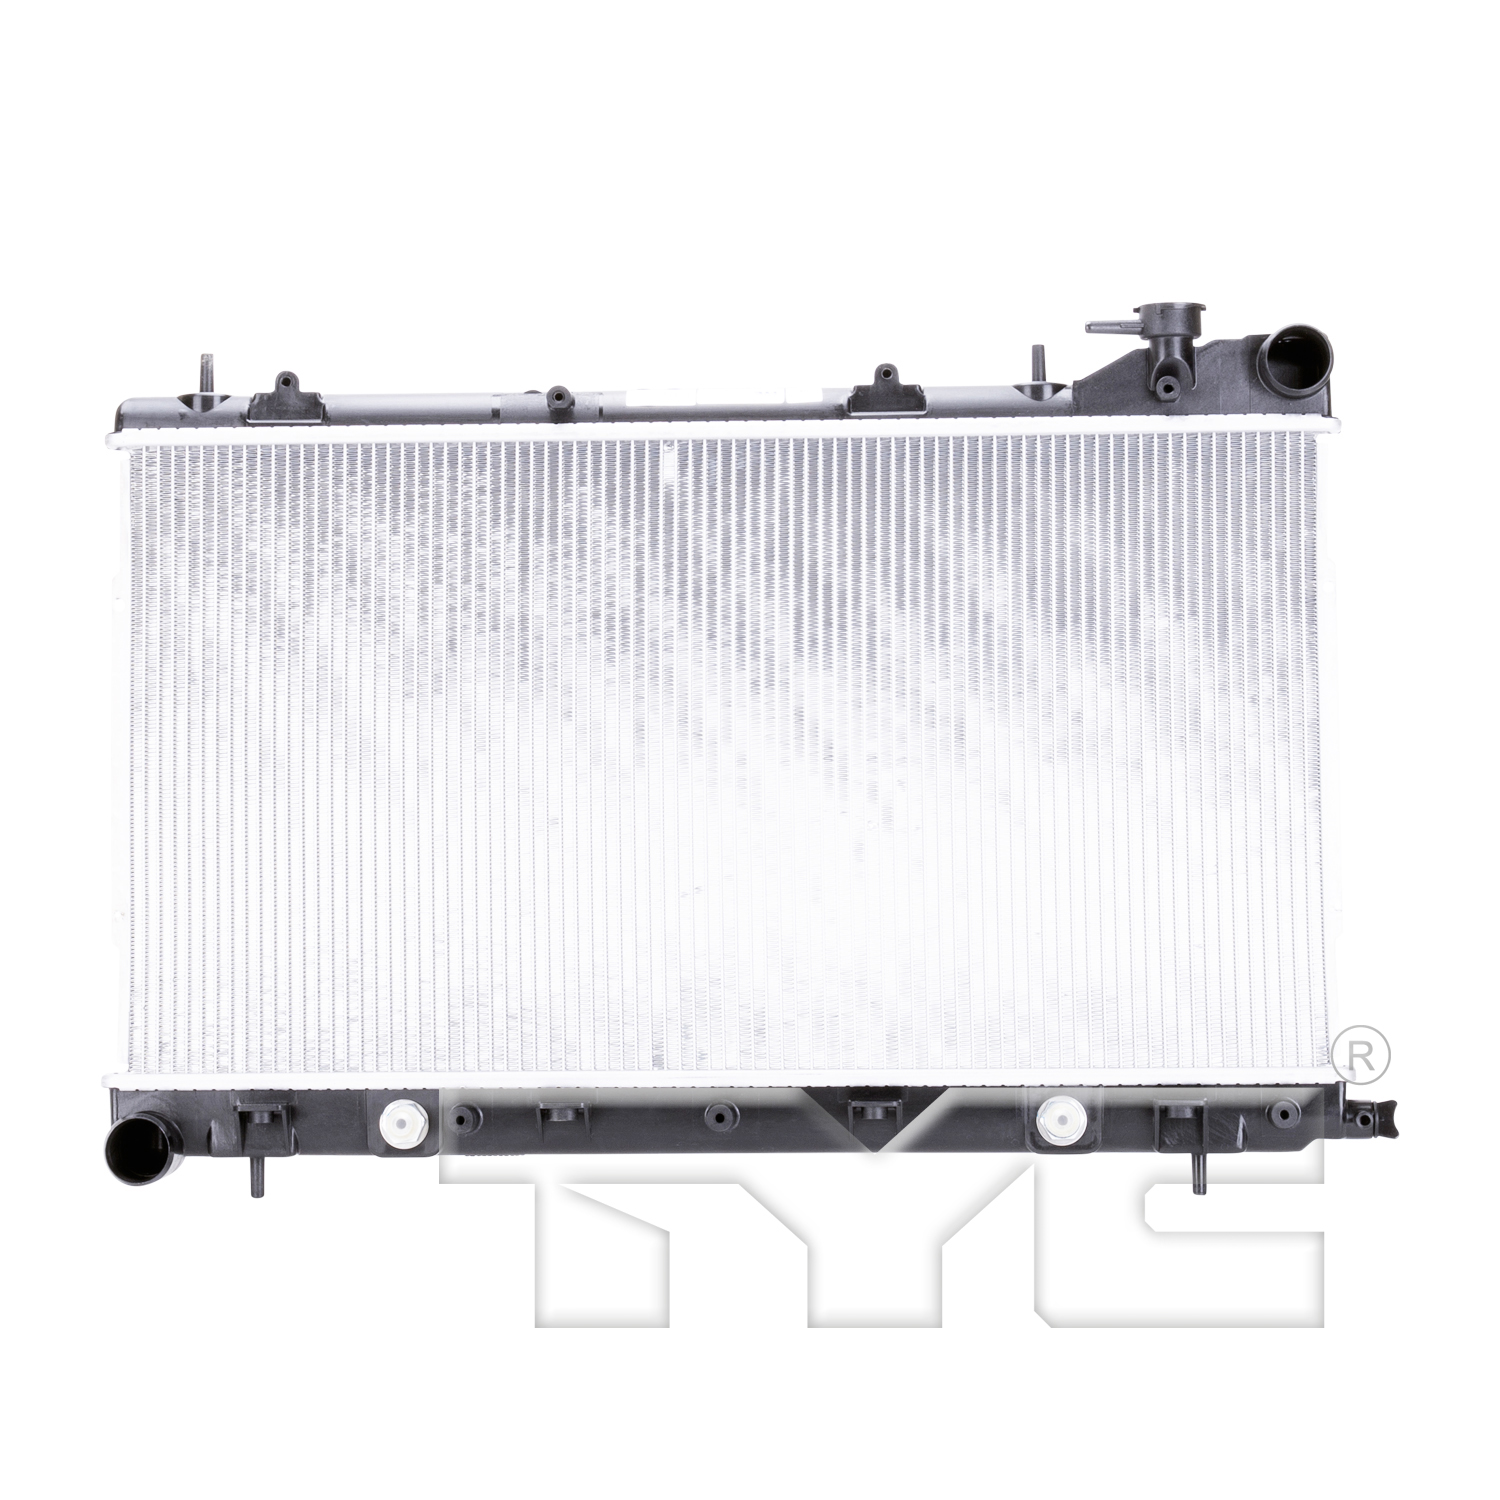 Aftermarket RADIATORS for SUBARU - FORESTER, FORESTER,06-08,Radiator assembly